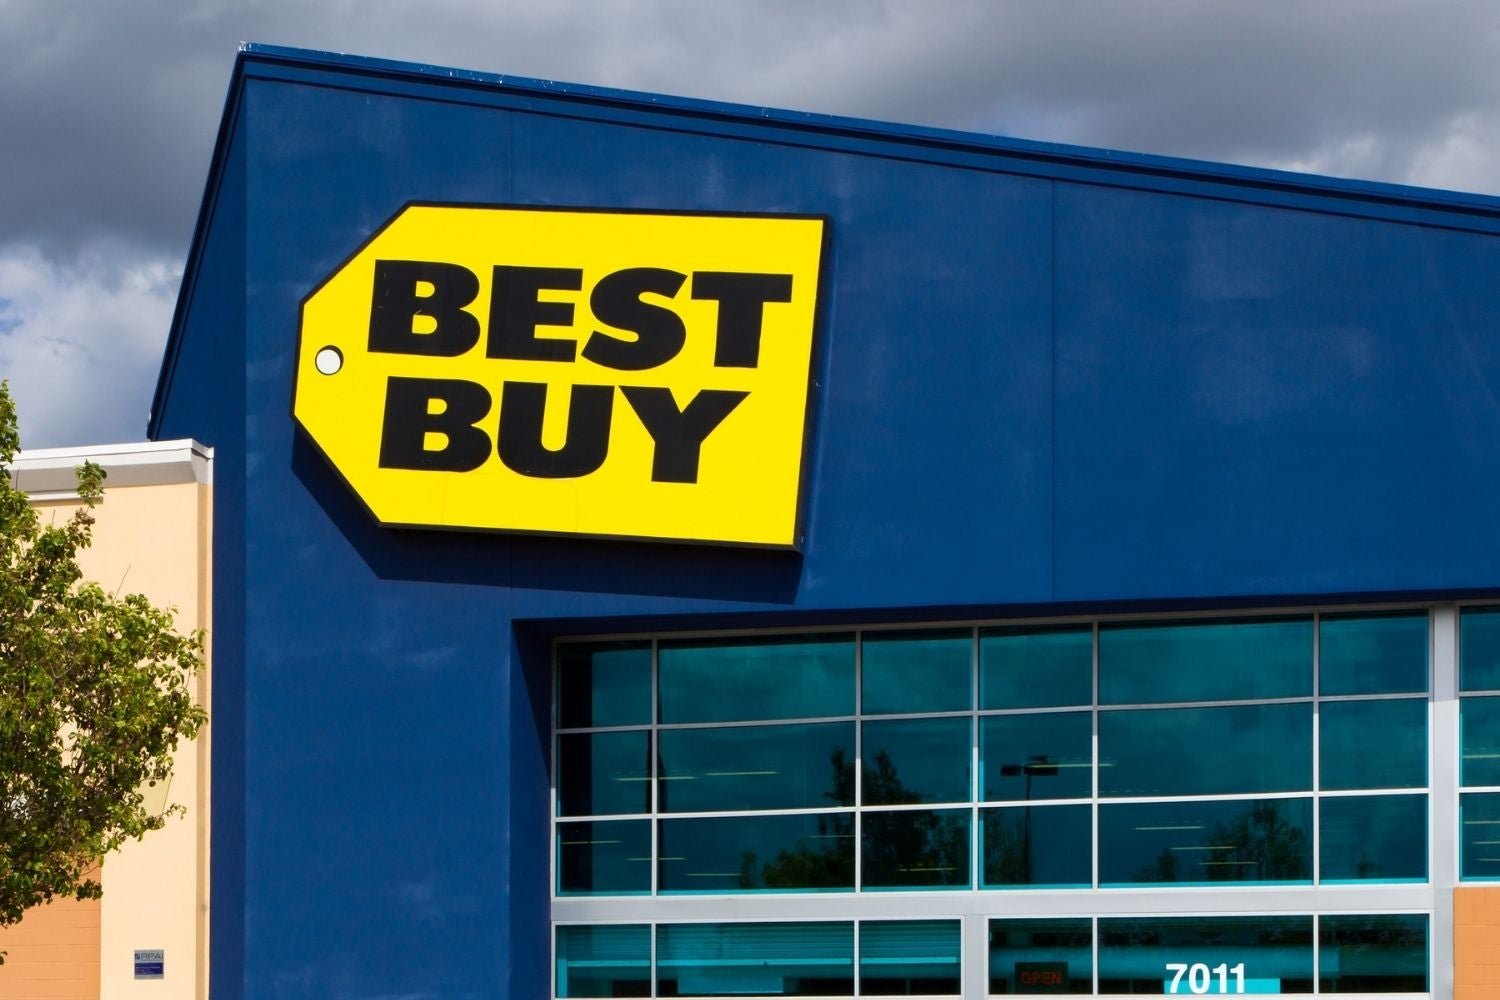 Best Buy Prime Day 2021: The Best Deals at Best Buy to Rival Amazon Prime Day